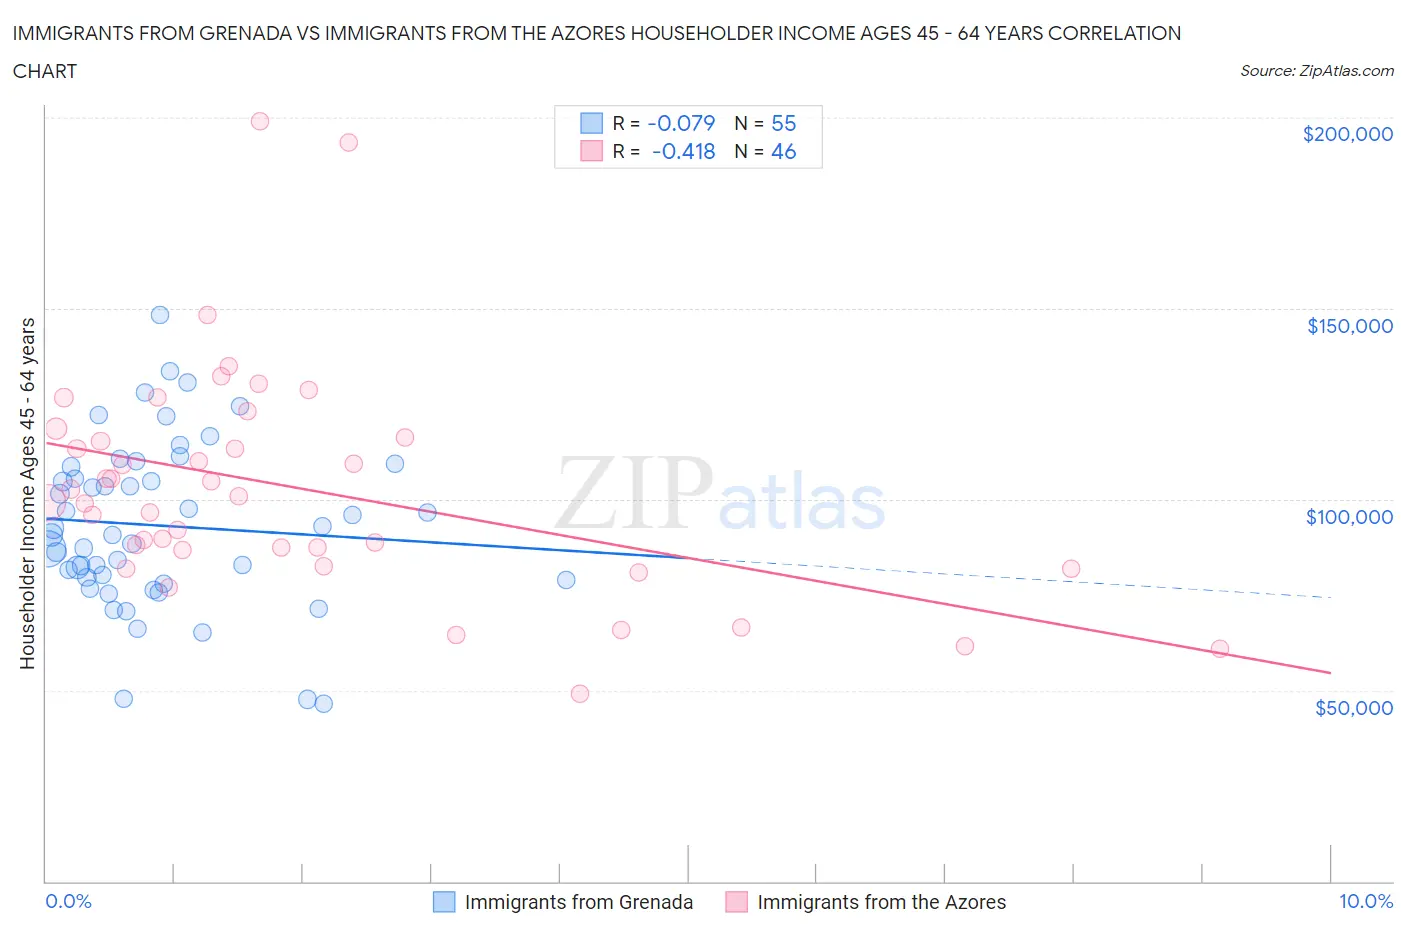 Immigrants from Grenada vs Immigrants from the Azores Householder Income Ages 45 - 64 years